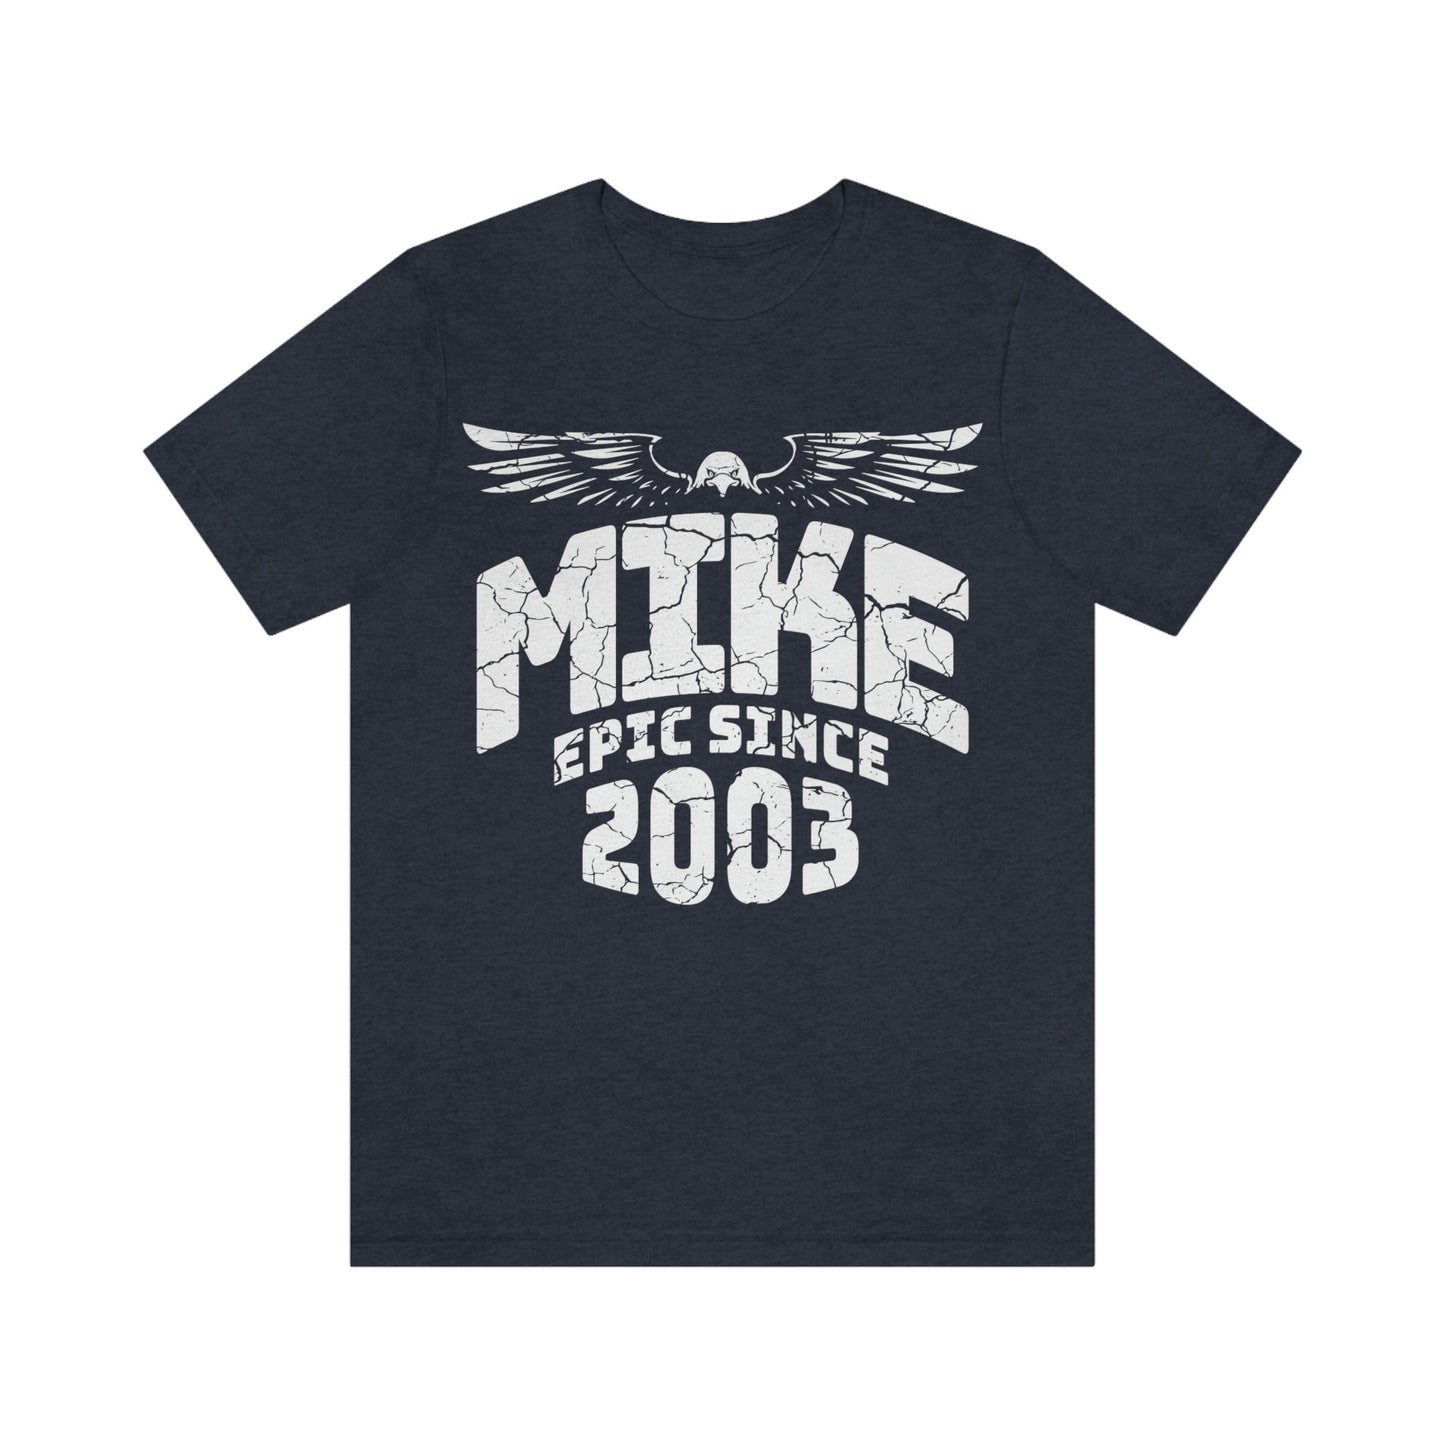 Birthday Gift T-Shirt for Son or Nephew, Epic Since 2003 Personalized Name t-shirt